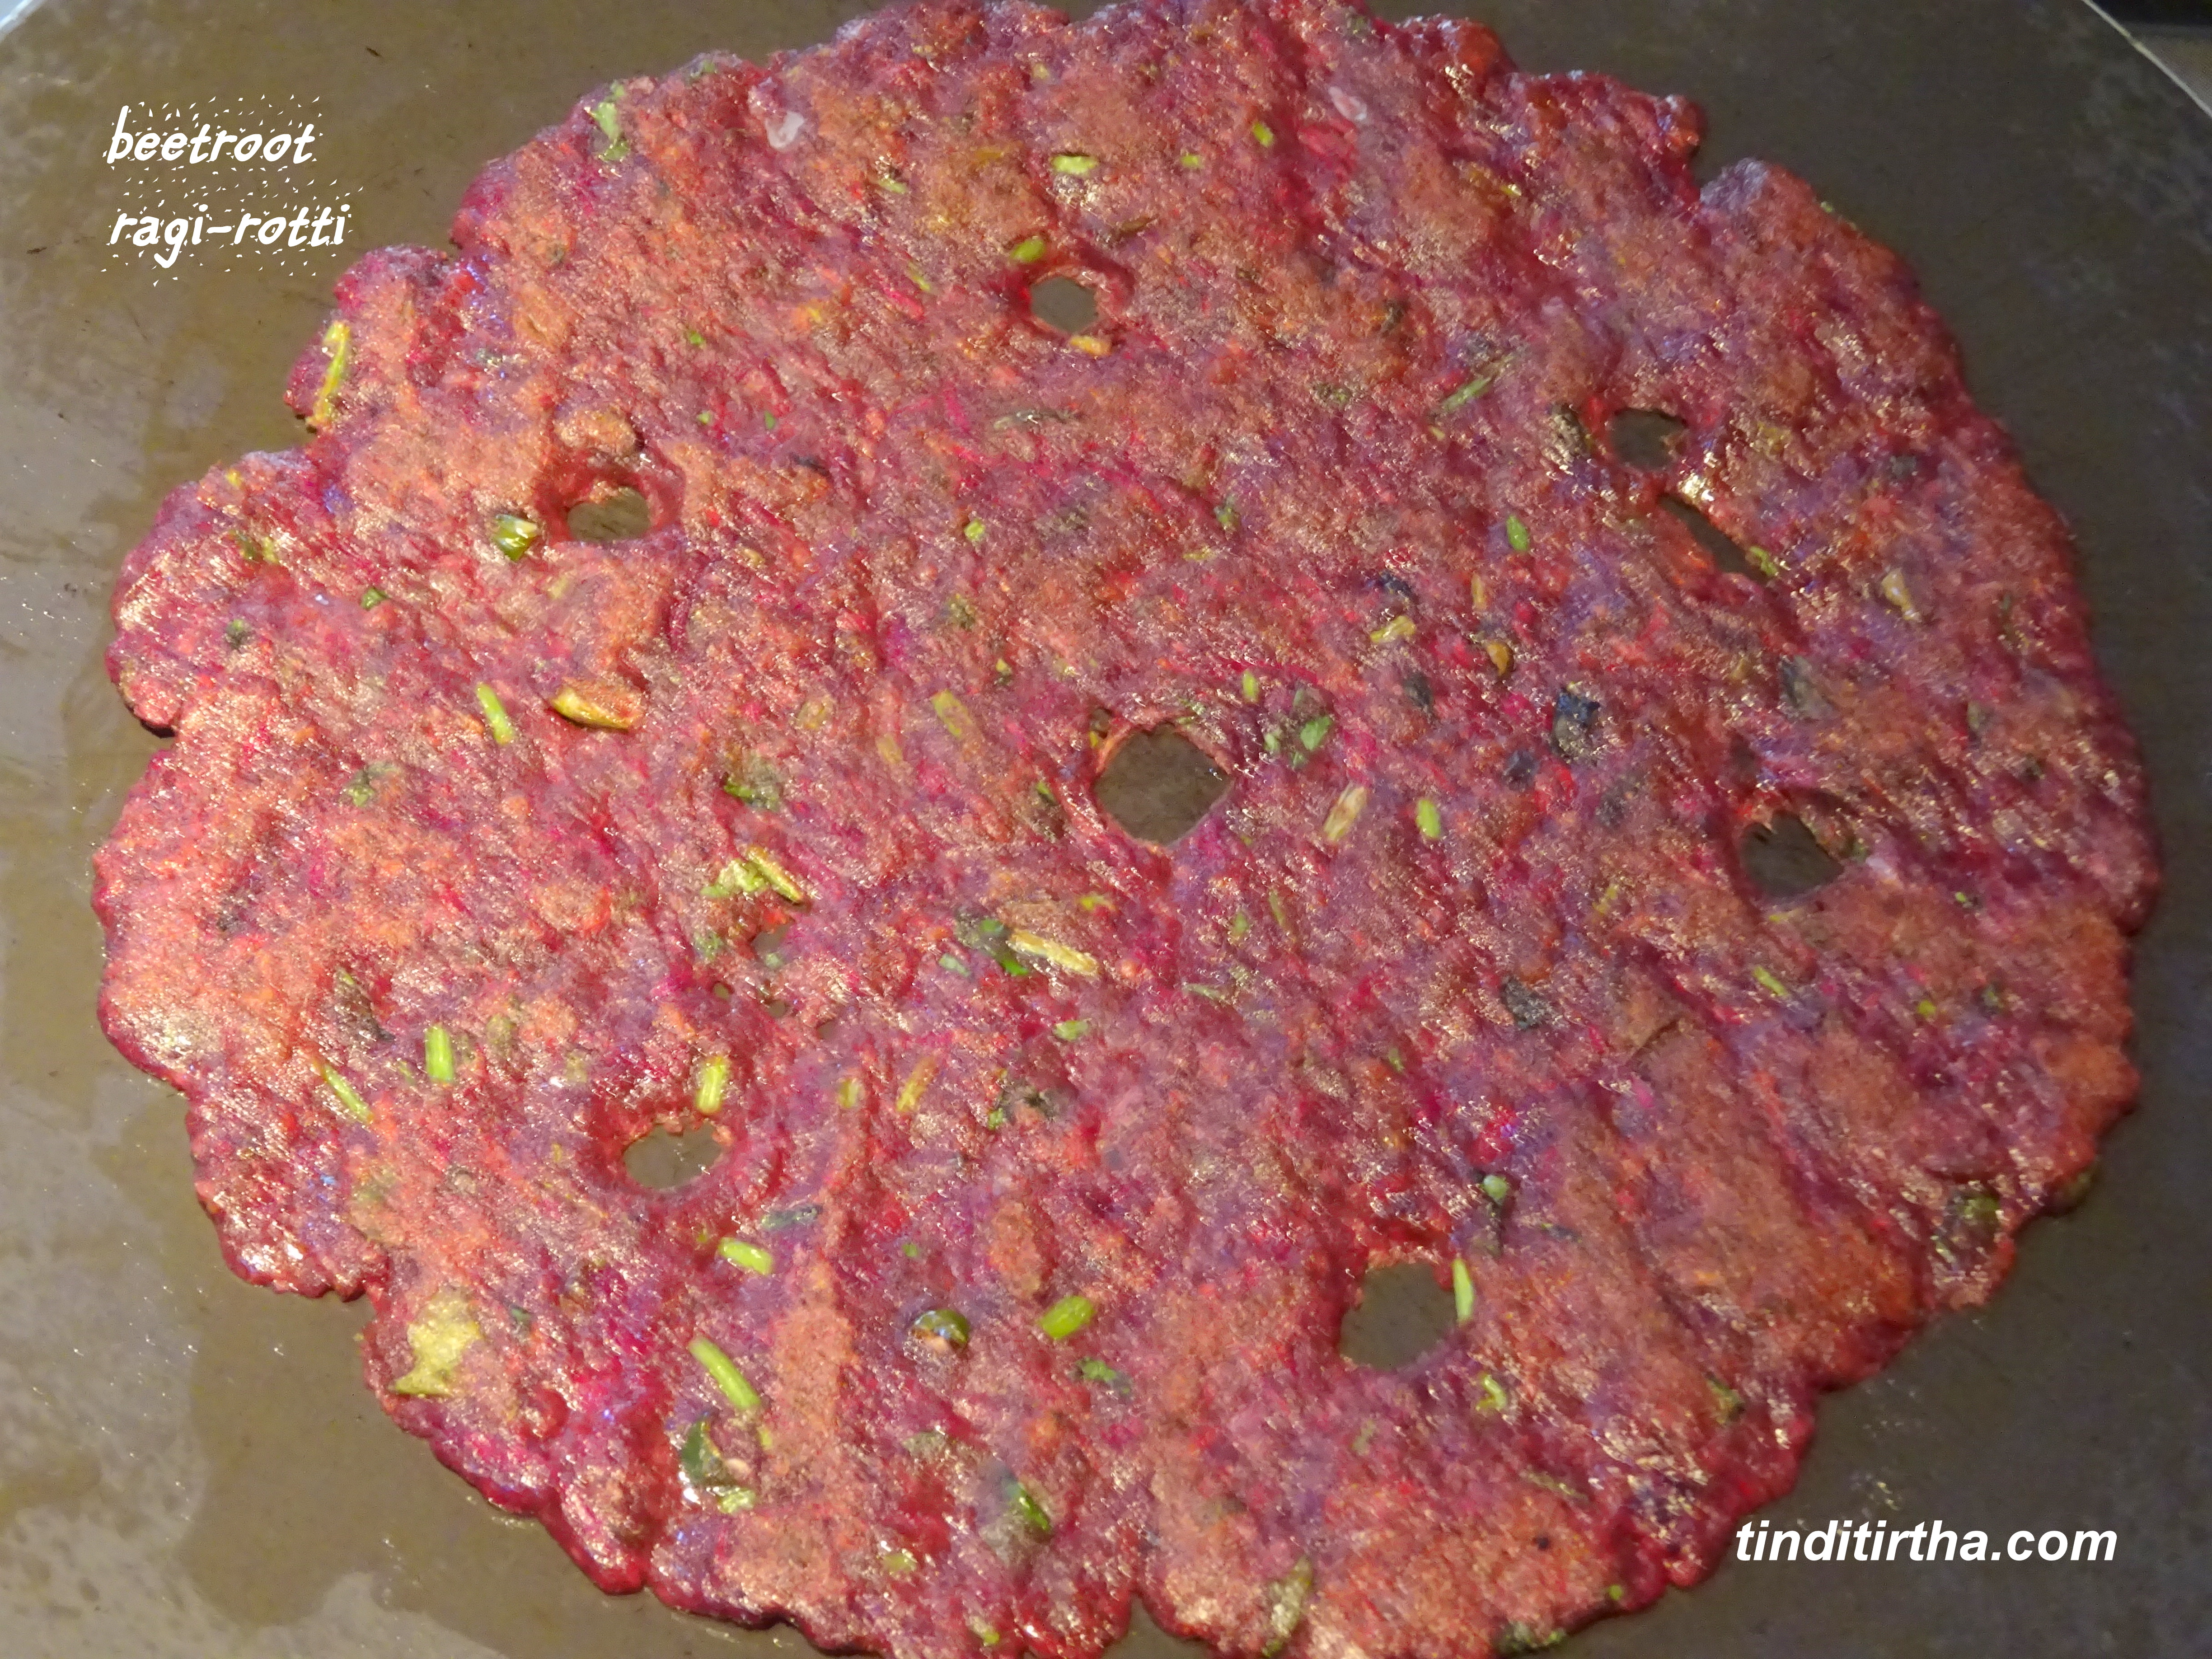 BEETROOT – RAGI ROTTI finger millet flour rotti by adding grated beetroot